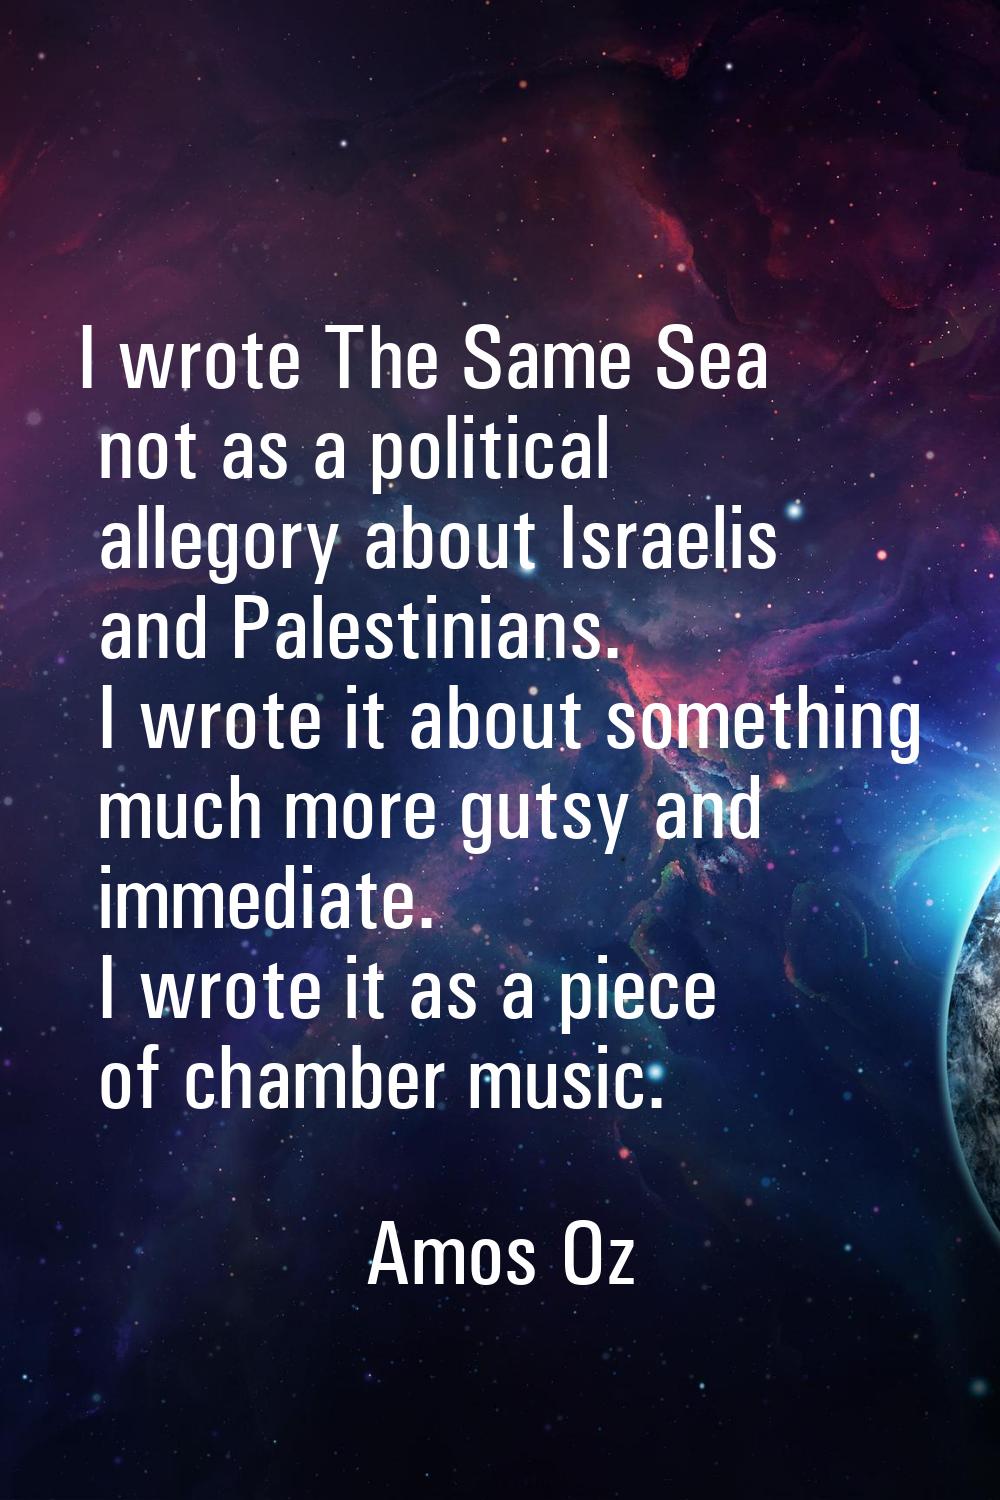 I wrote The Same Sea not as a political allegory about Israelis and Palestinians. I wrote it about 